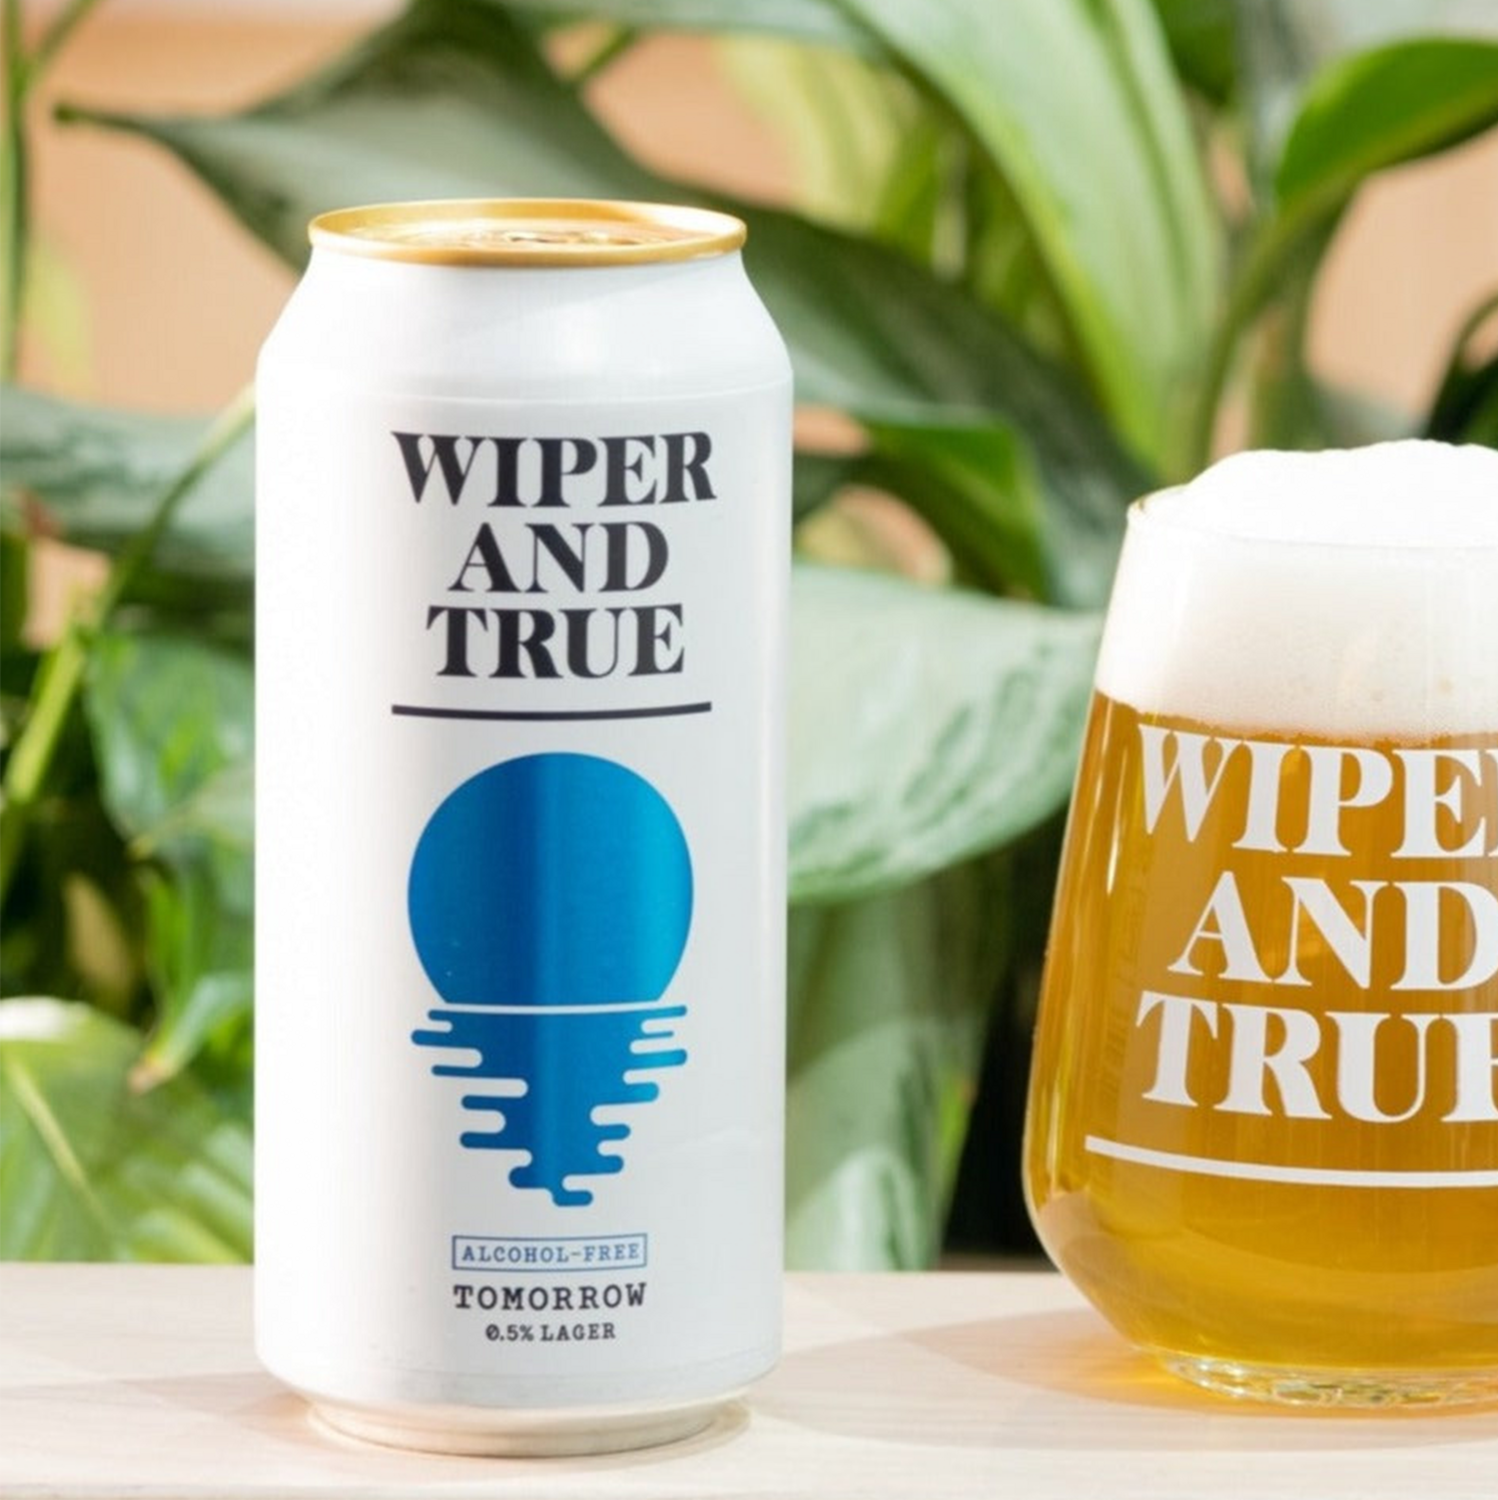 Wiper & True Tomorrow Alcohol Free Lager